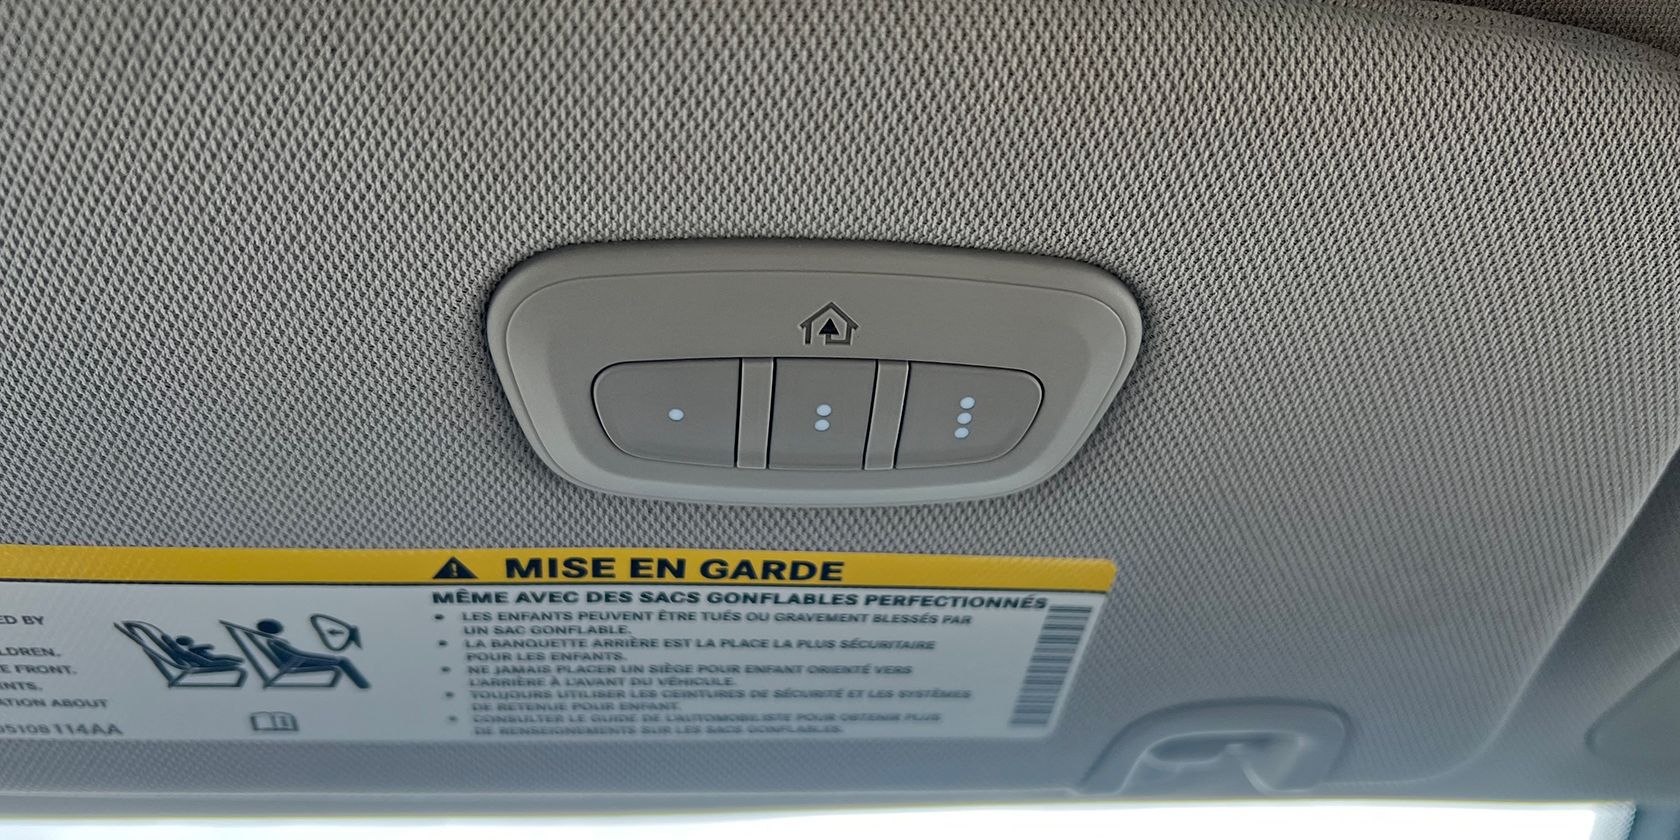 Homelink button panel in a car